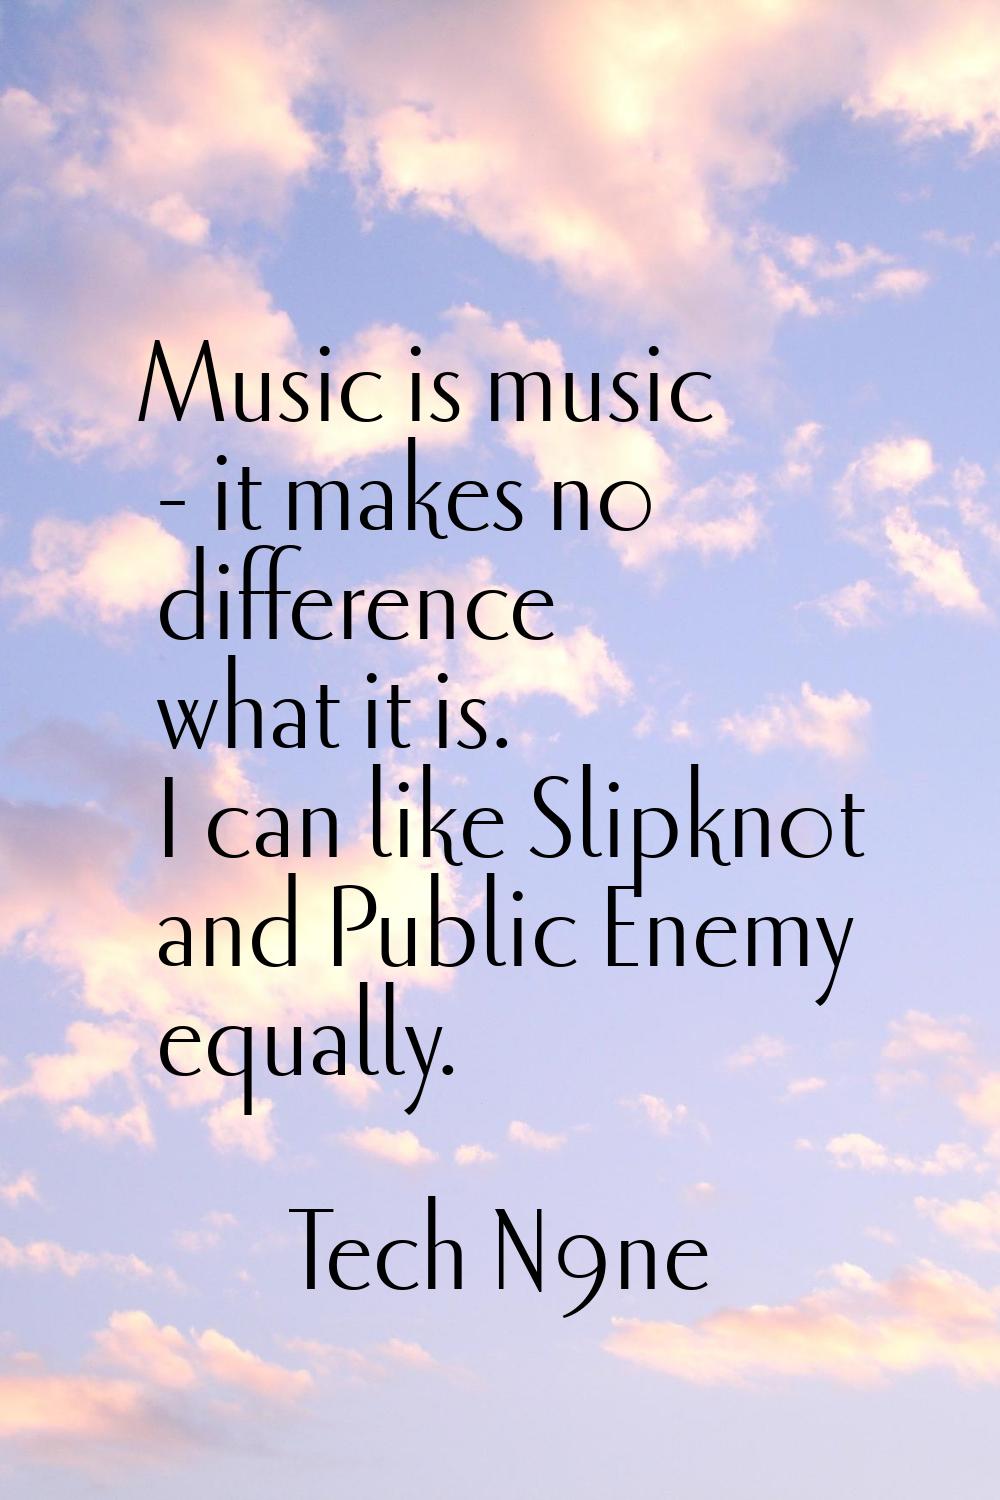 Music is music - it makes no difference what it is. I can like Slipknot and Public Enemy equally.